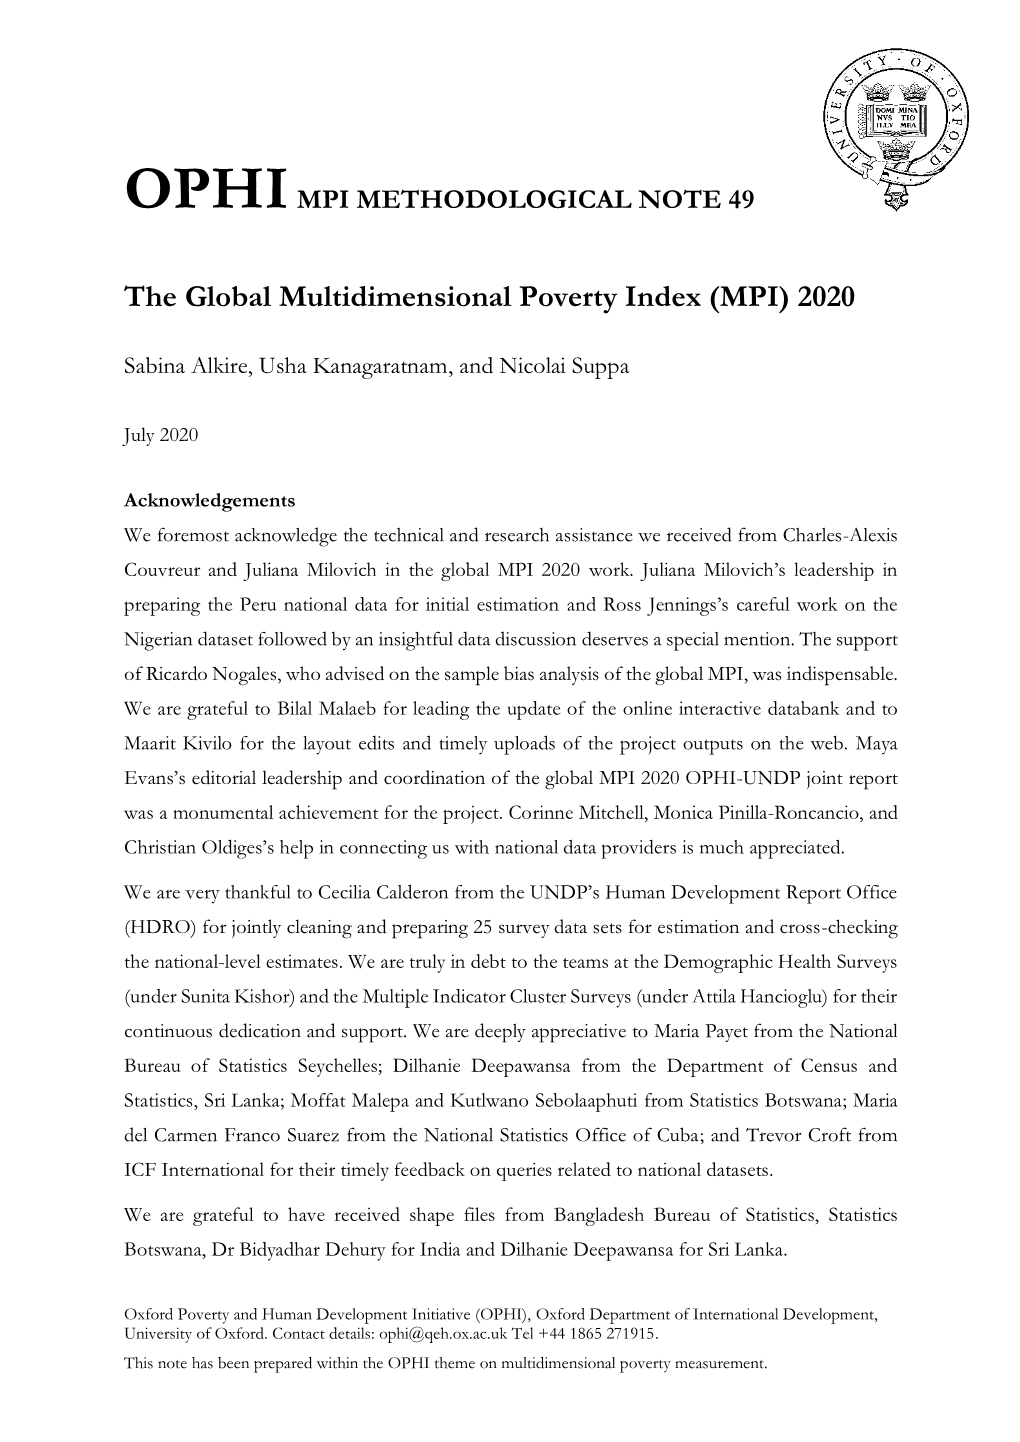 The Global Multidimensional Poverty Index (MPI) 2020